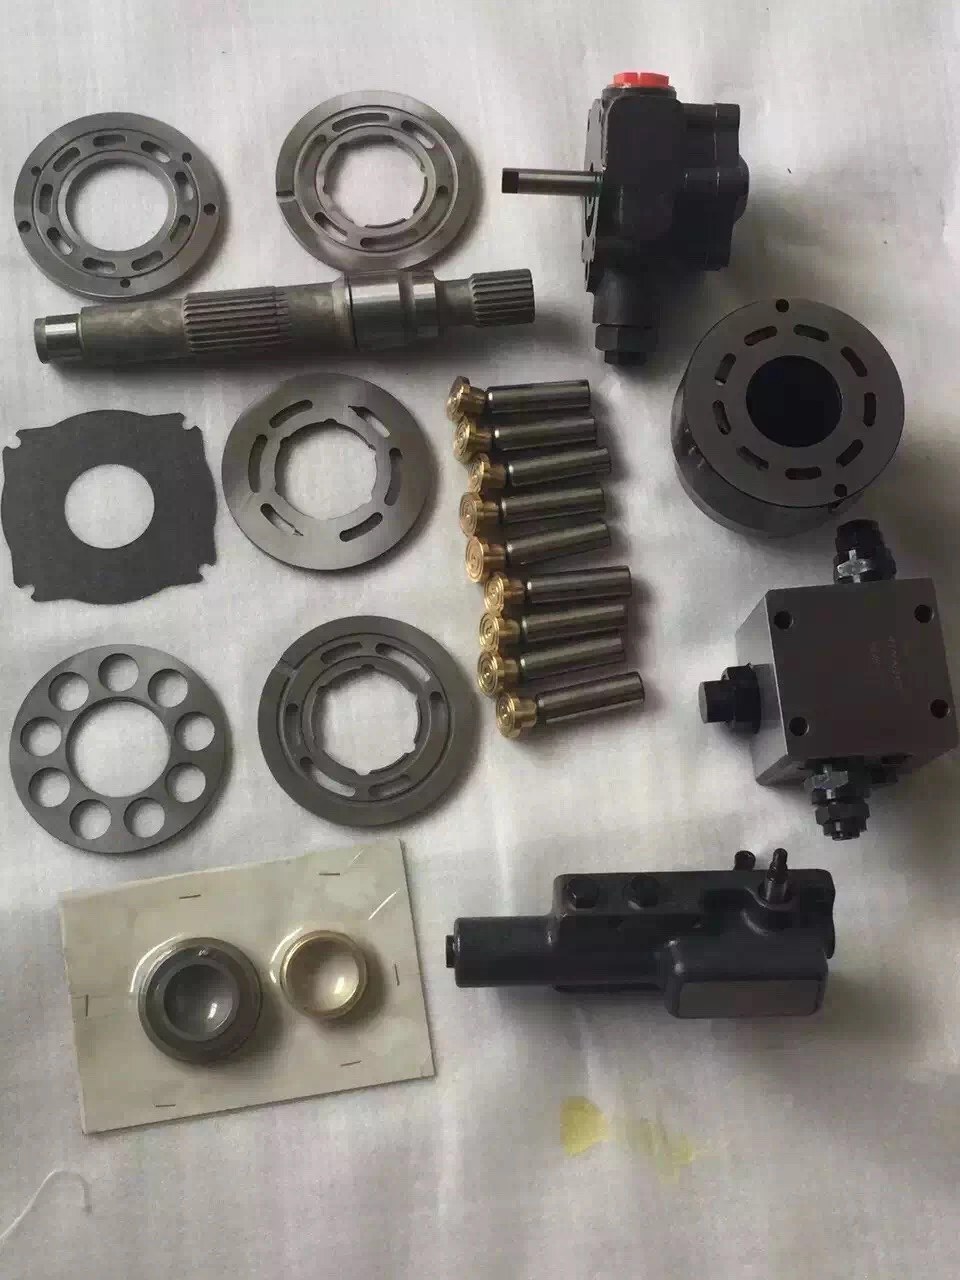 Rexroth A4vg125 Hydraulic Pump Spare Parts for Engine Alternator Cylinder Block, Piston, Valve Plate, Retainer Plate, Shaft, Swash Plate with Best Price Factory